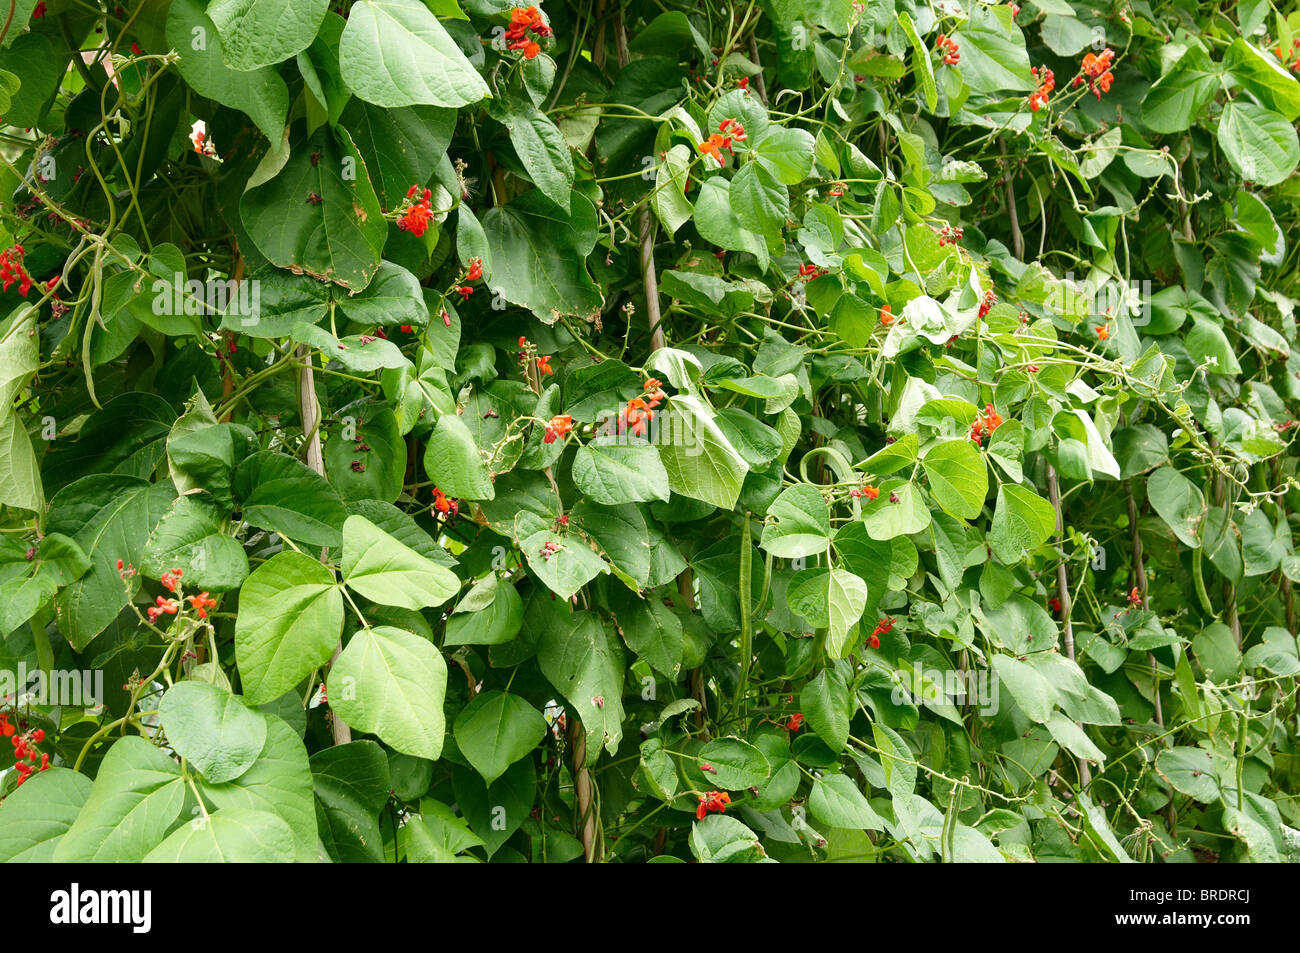 Scarlet runner bean plants with flowers and maturing beans in an English vegetable garden. Stock Photo